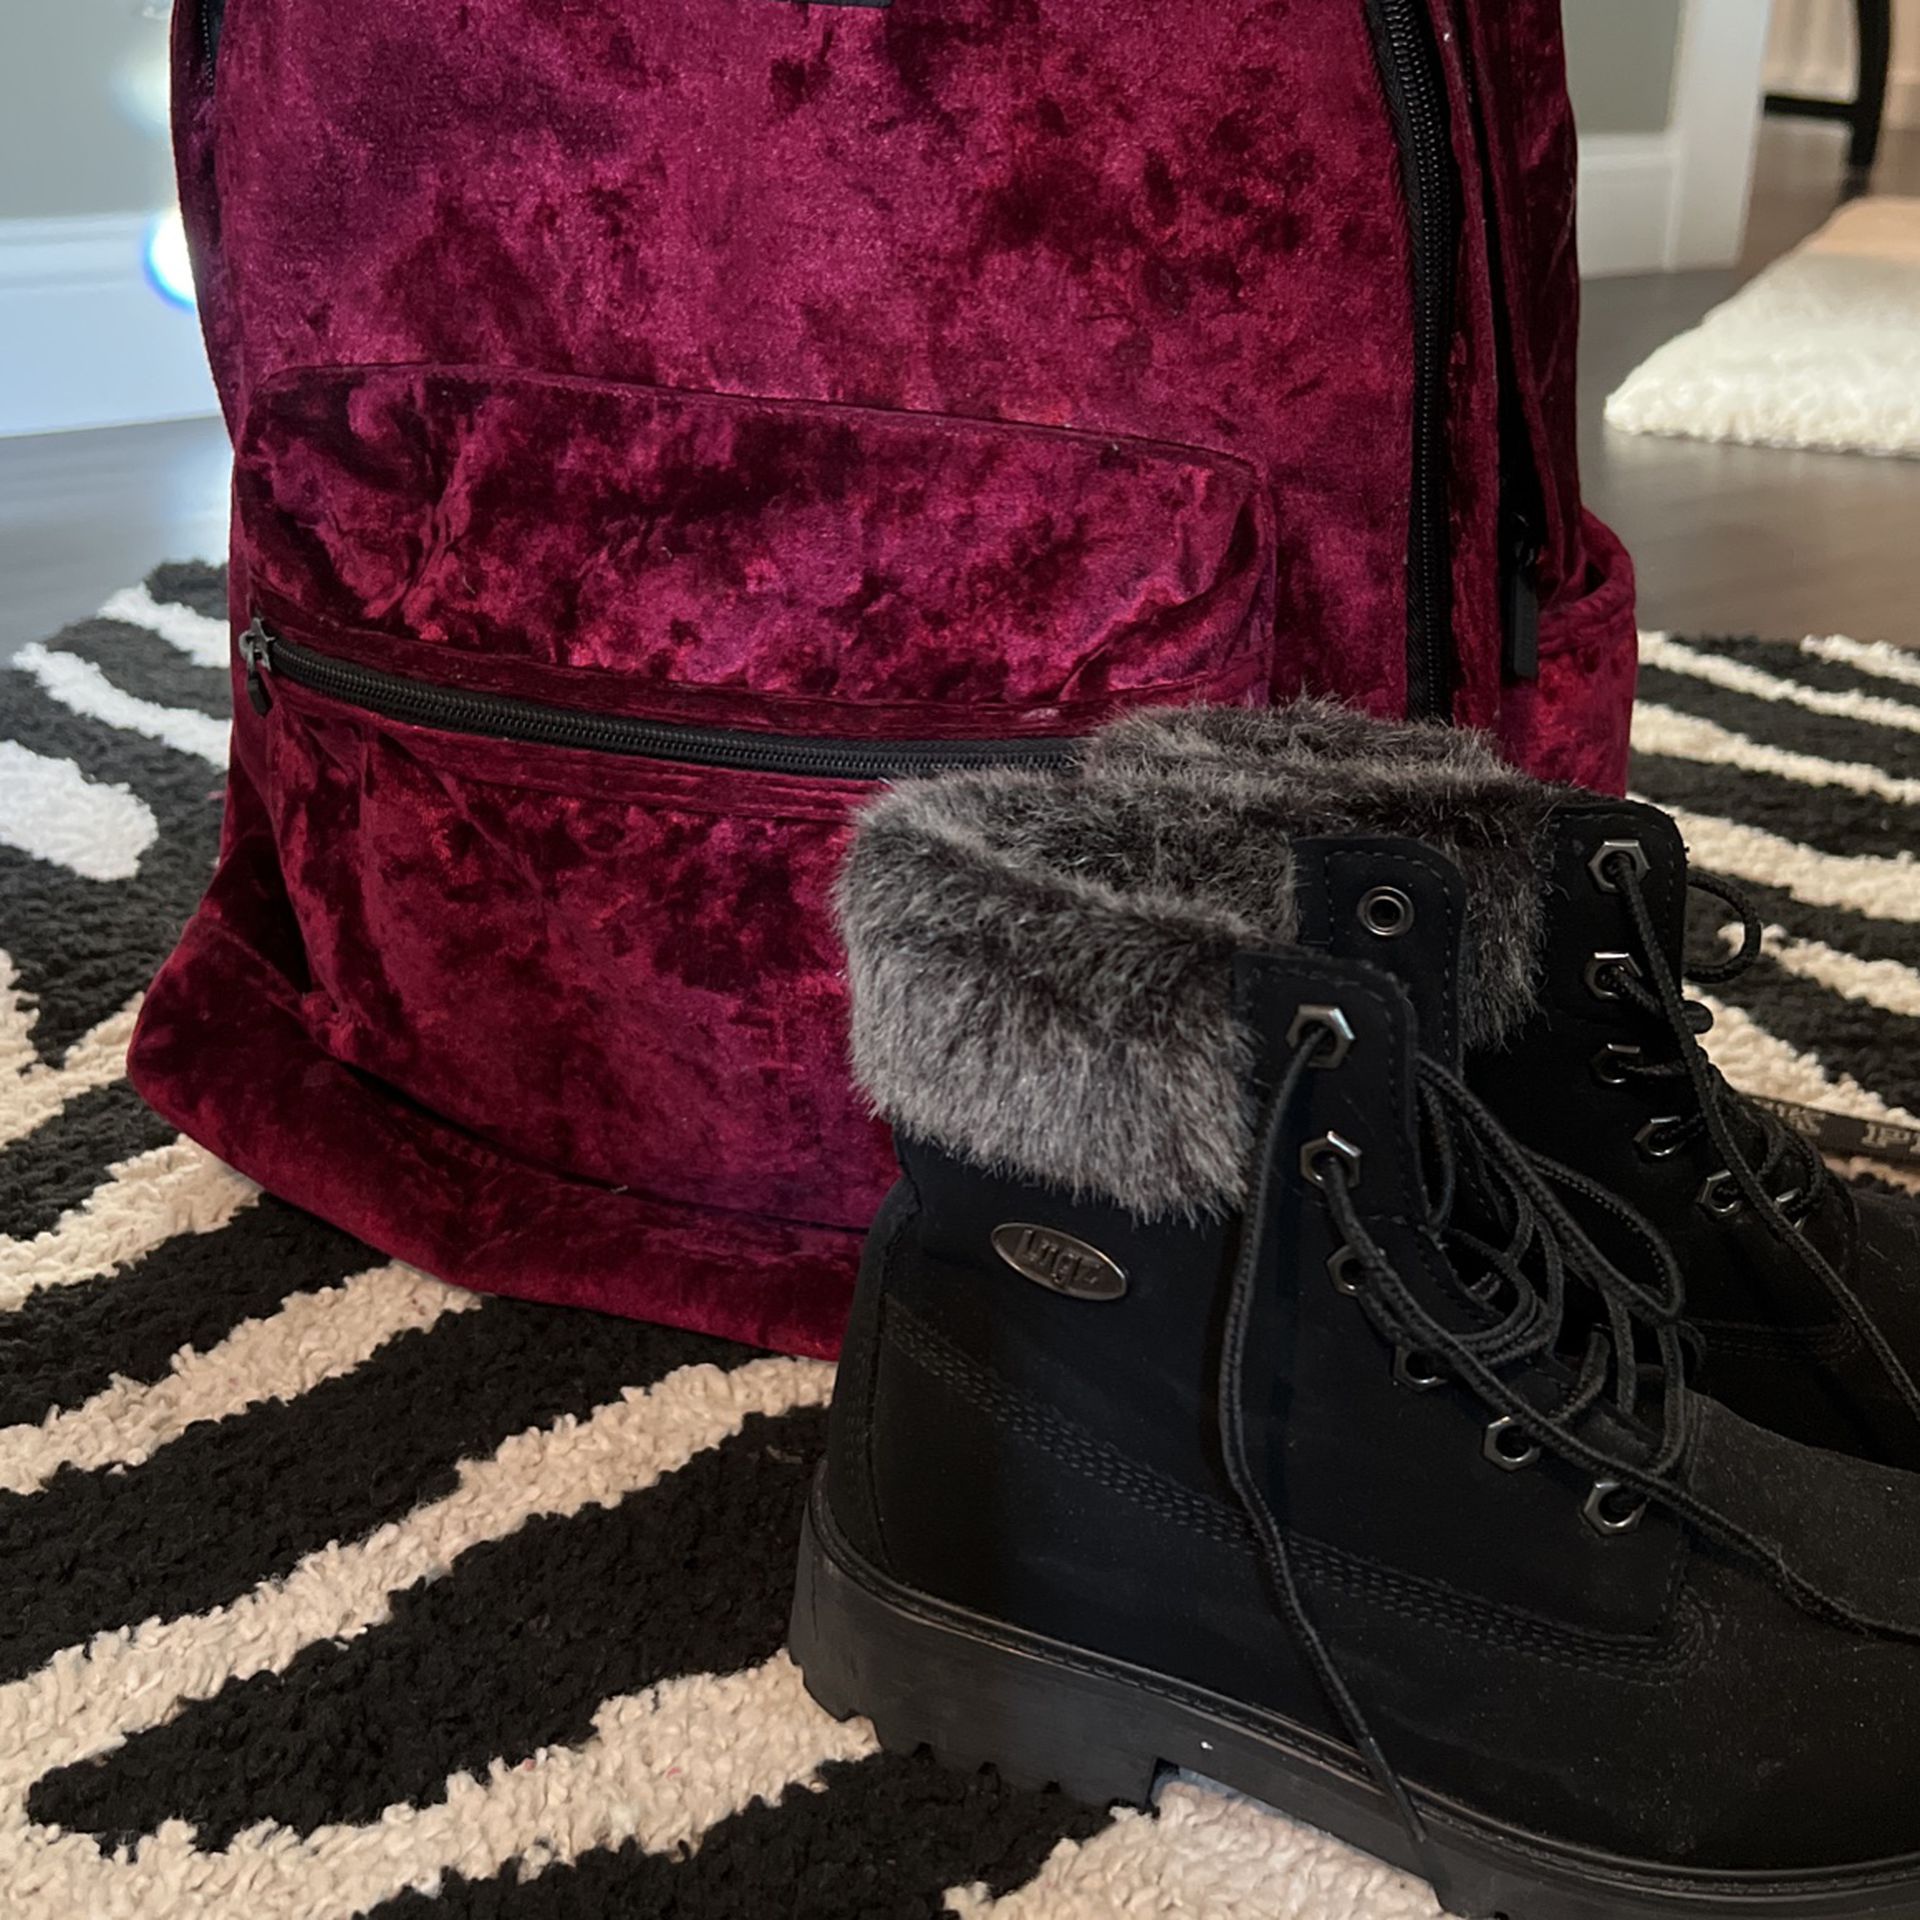 Backpack By PINK and Lugs Brand Boot.